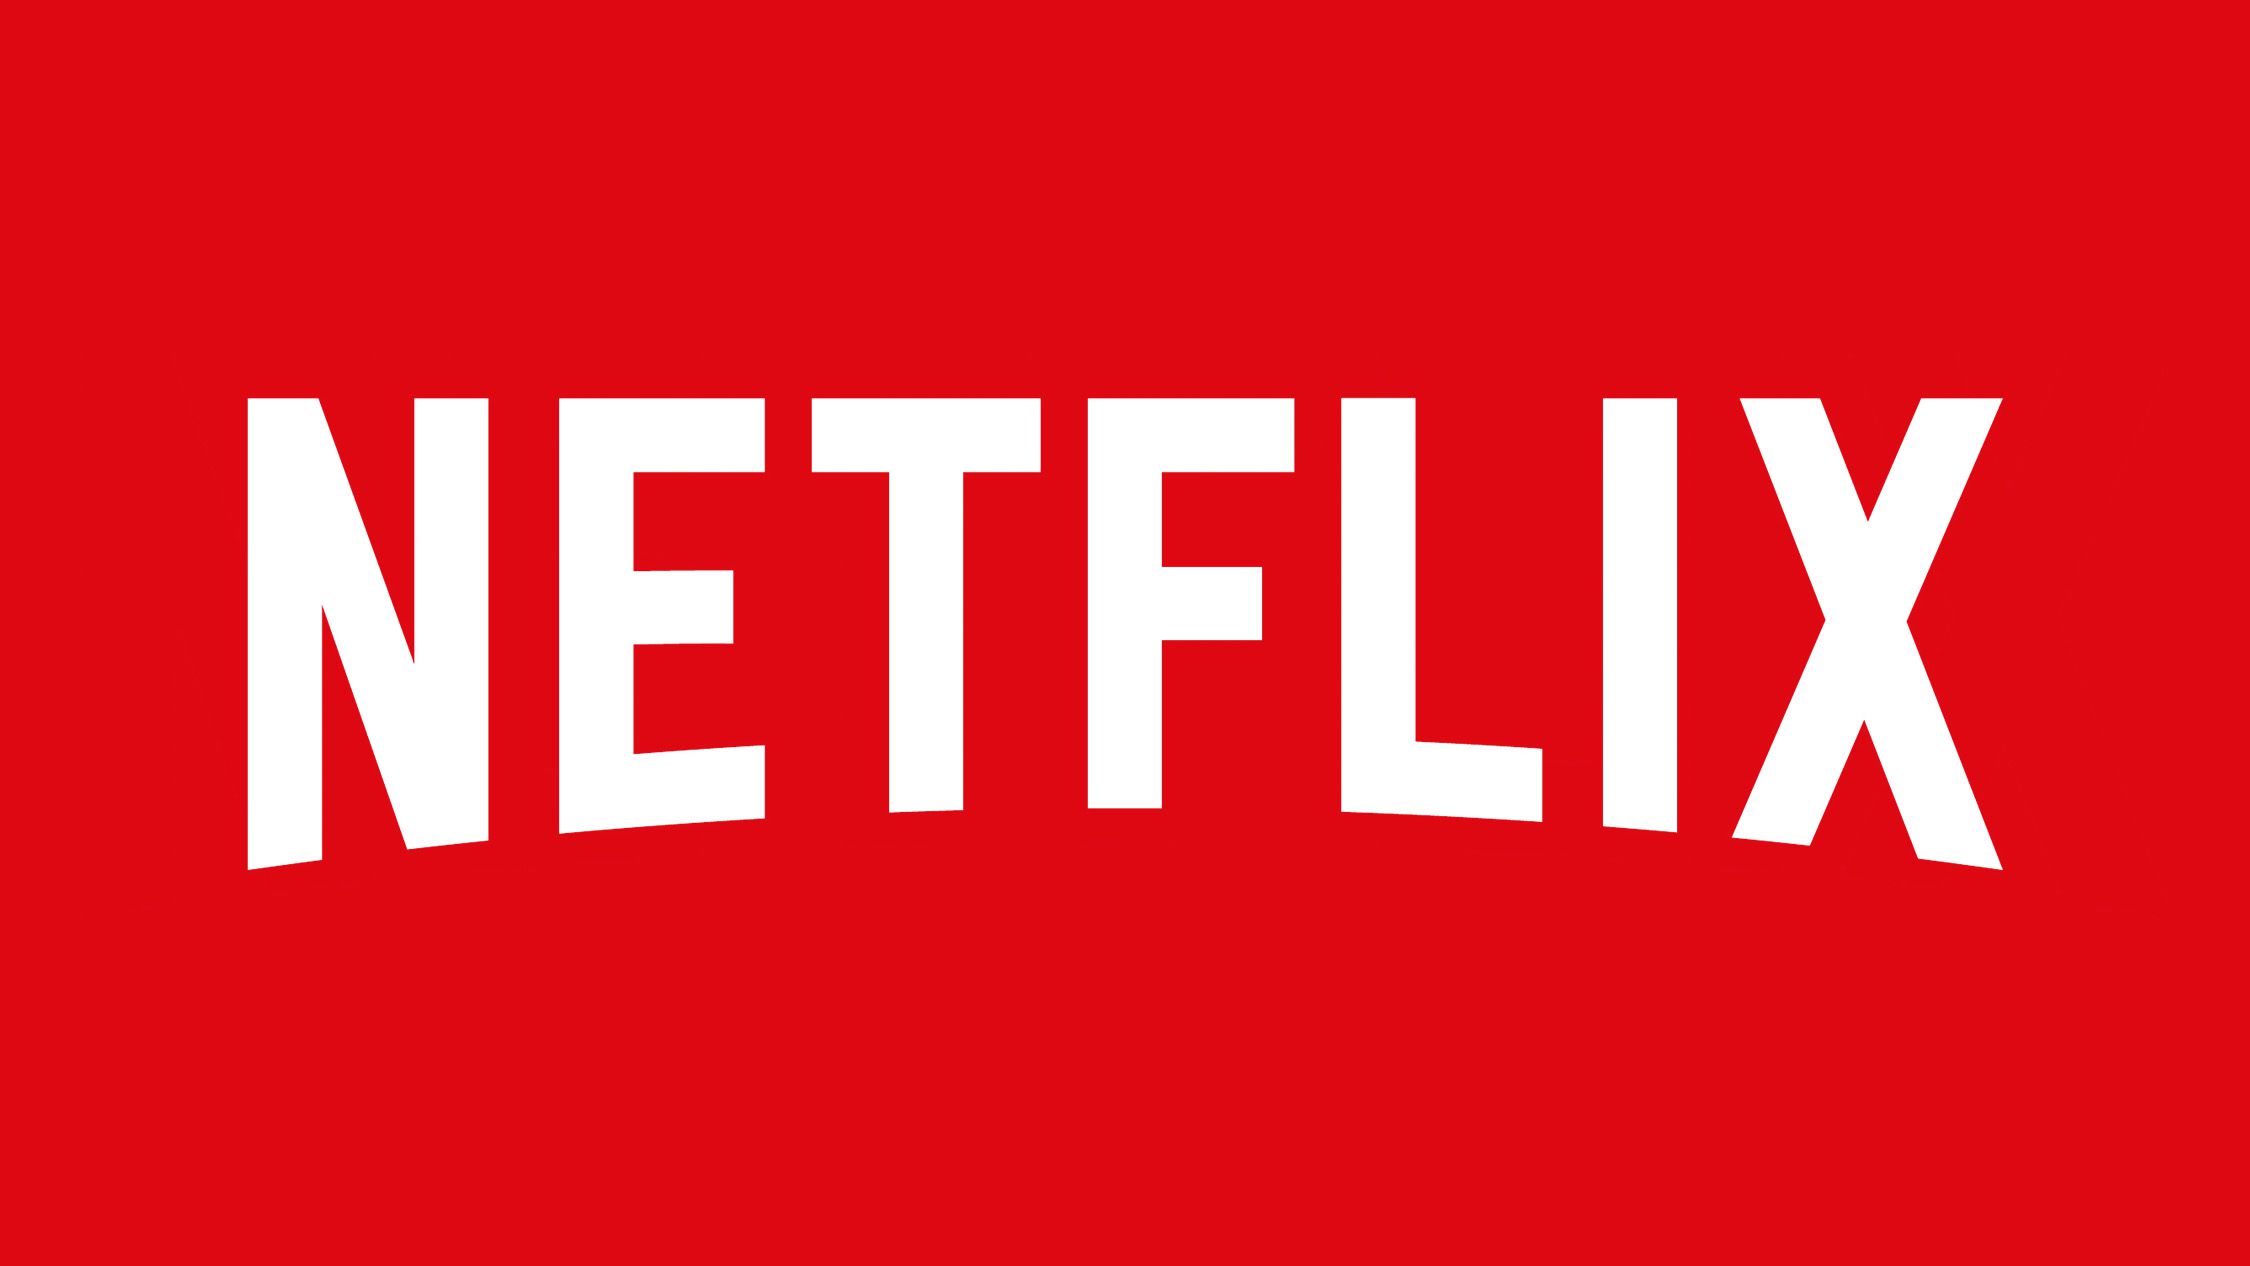 Netflix Increases Streaming Quality of ‘Basic With Ads’ Plan to 1080p